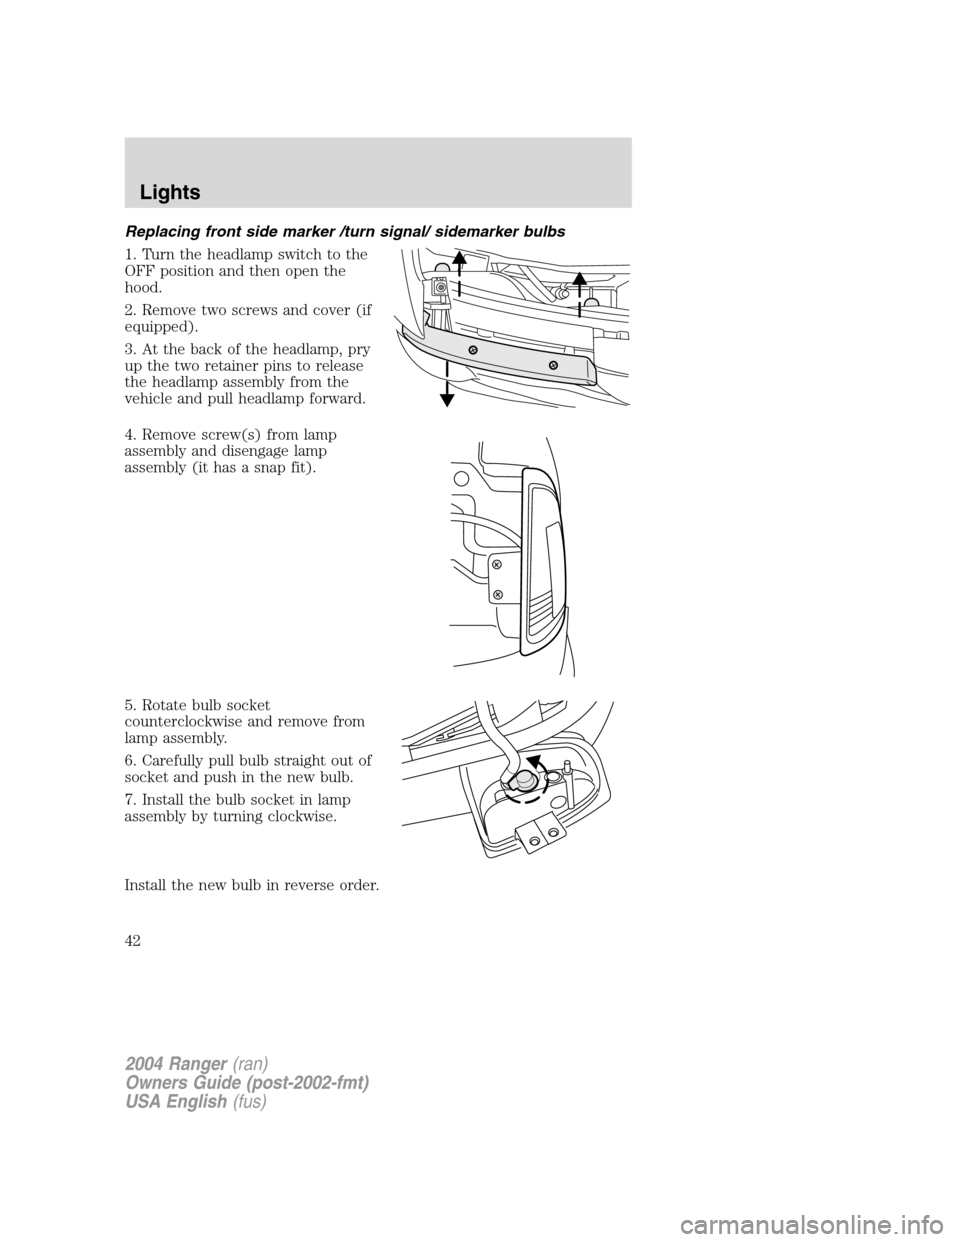 FORD RANGER 2004 2.G Owners Manual Replacing front side marker /turn signal/ sidemarker bulbs
1. Turn the headlamp switch to the
OFF position and then open the
hood.
2. Remove two screws and cover (if
equipped).
3. At the back of the h